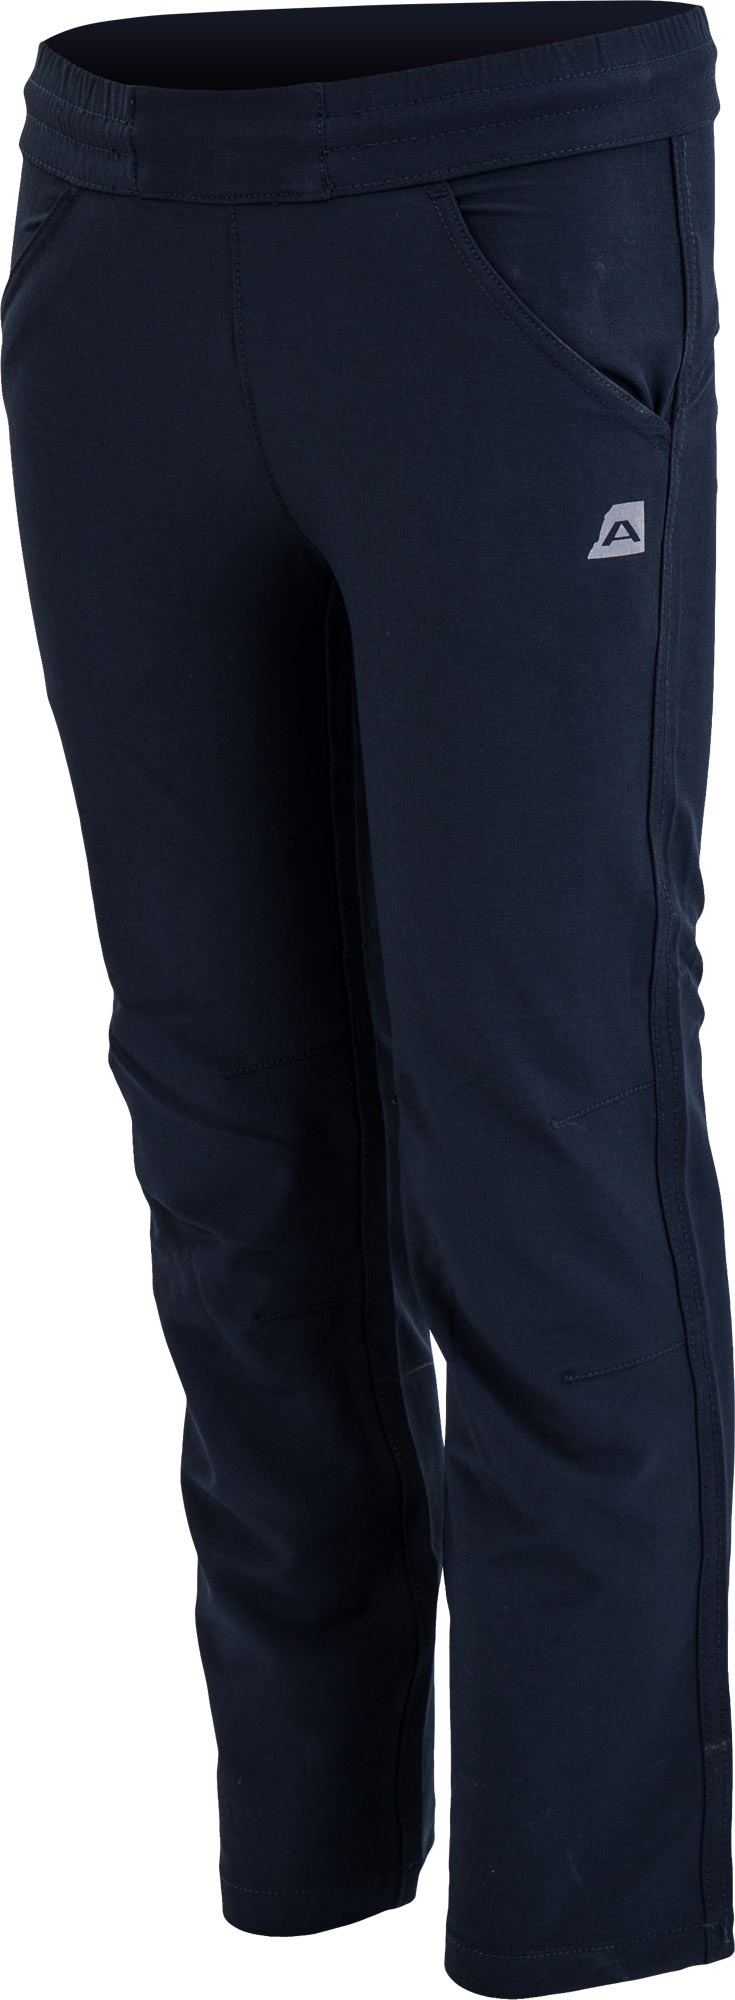 Kids softshell trousers